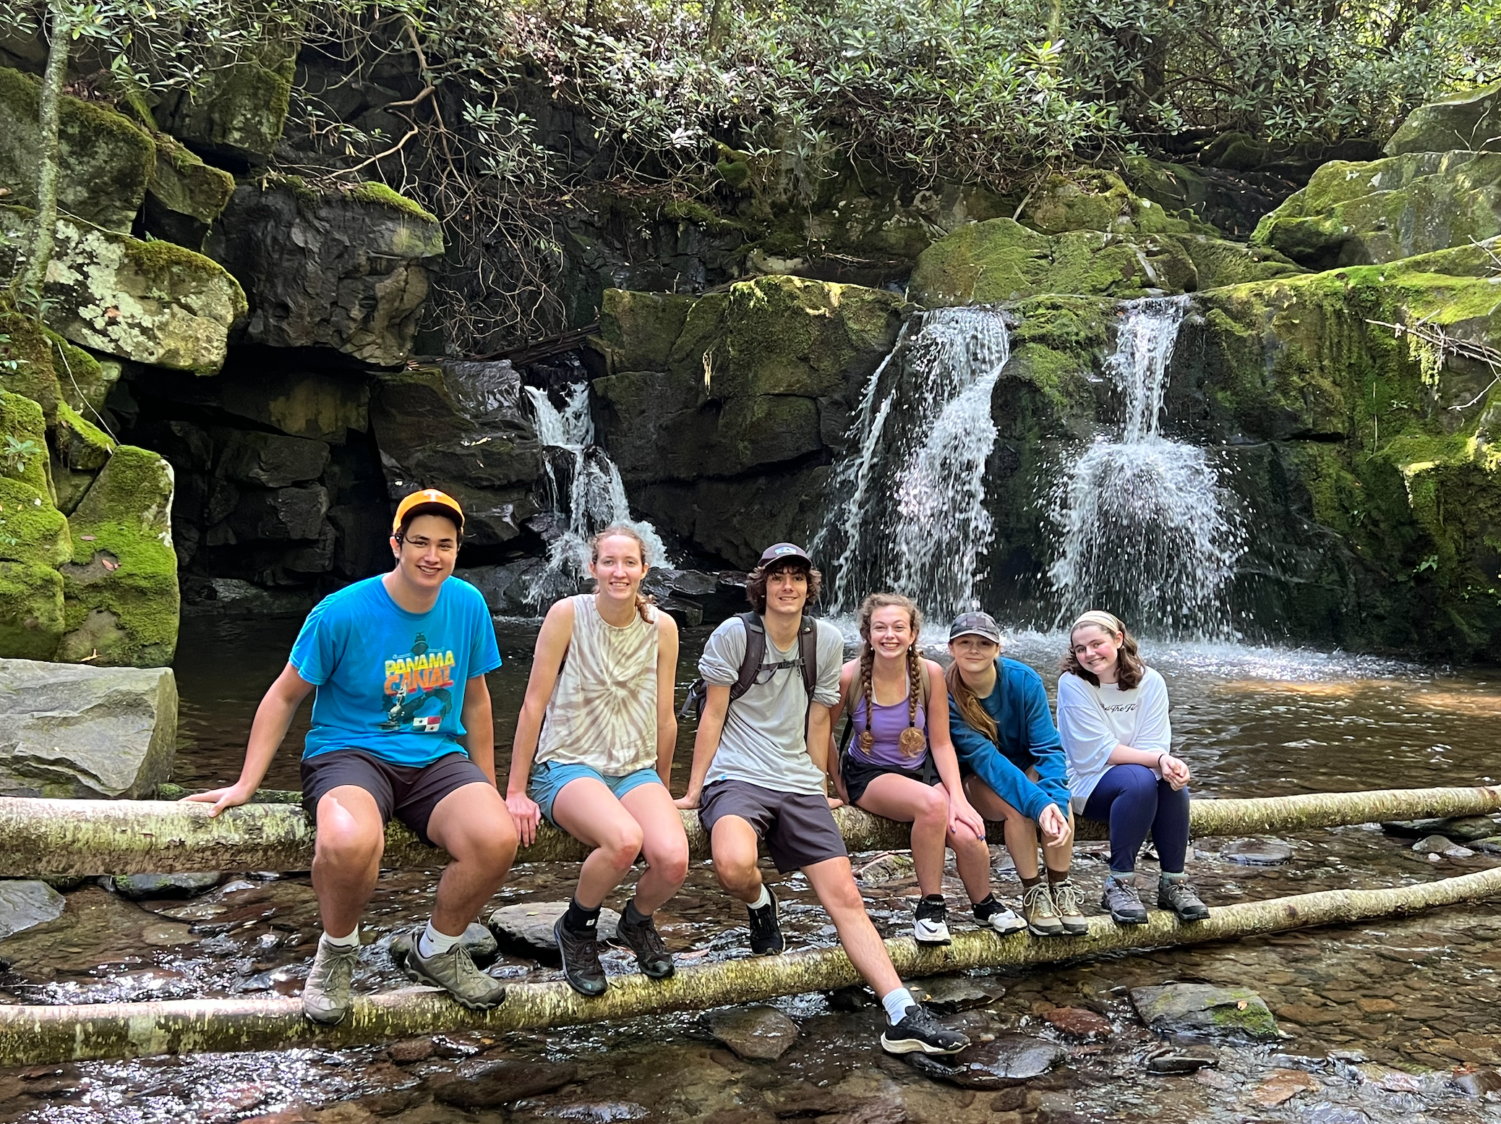 Hiking Club returns to Bearden after two-year break during pandemic – The  Bark